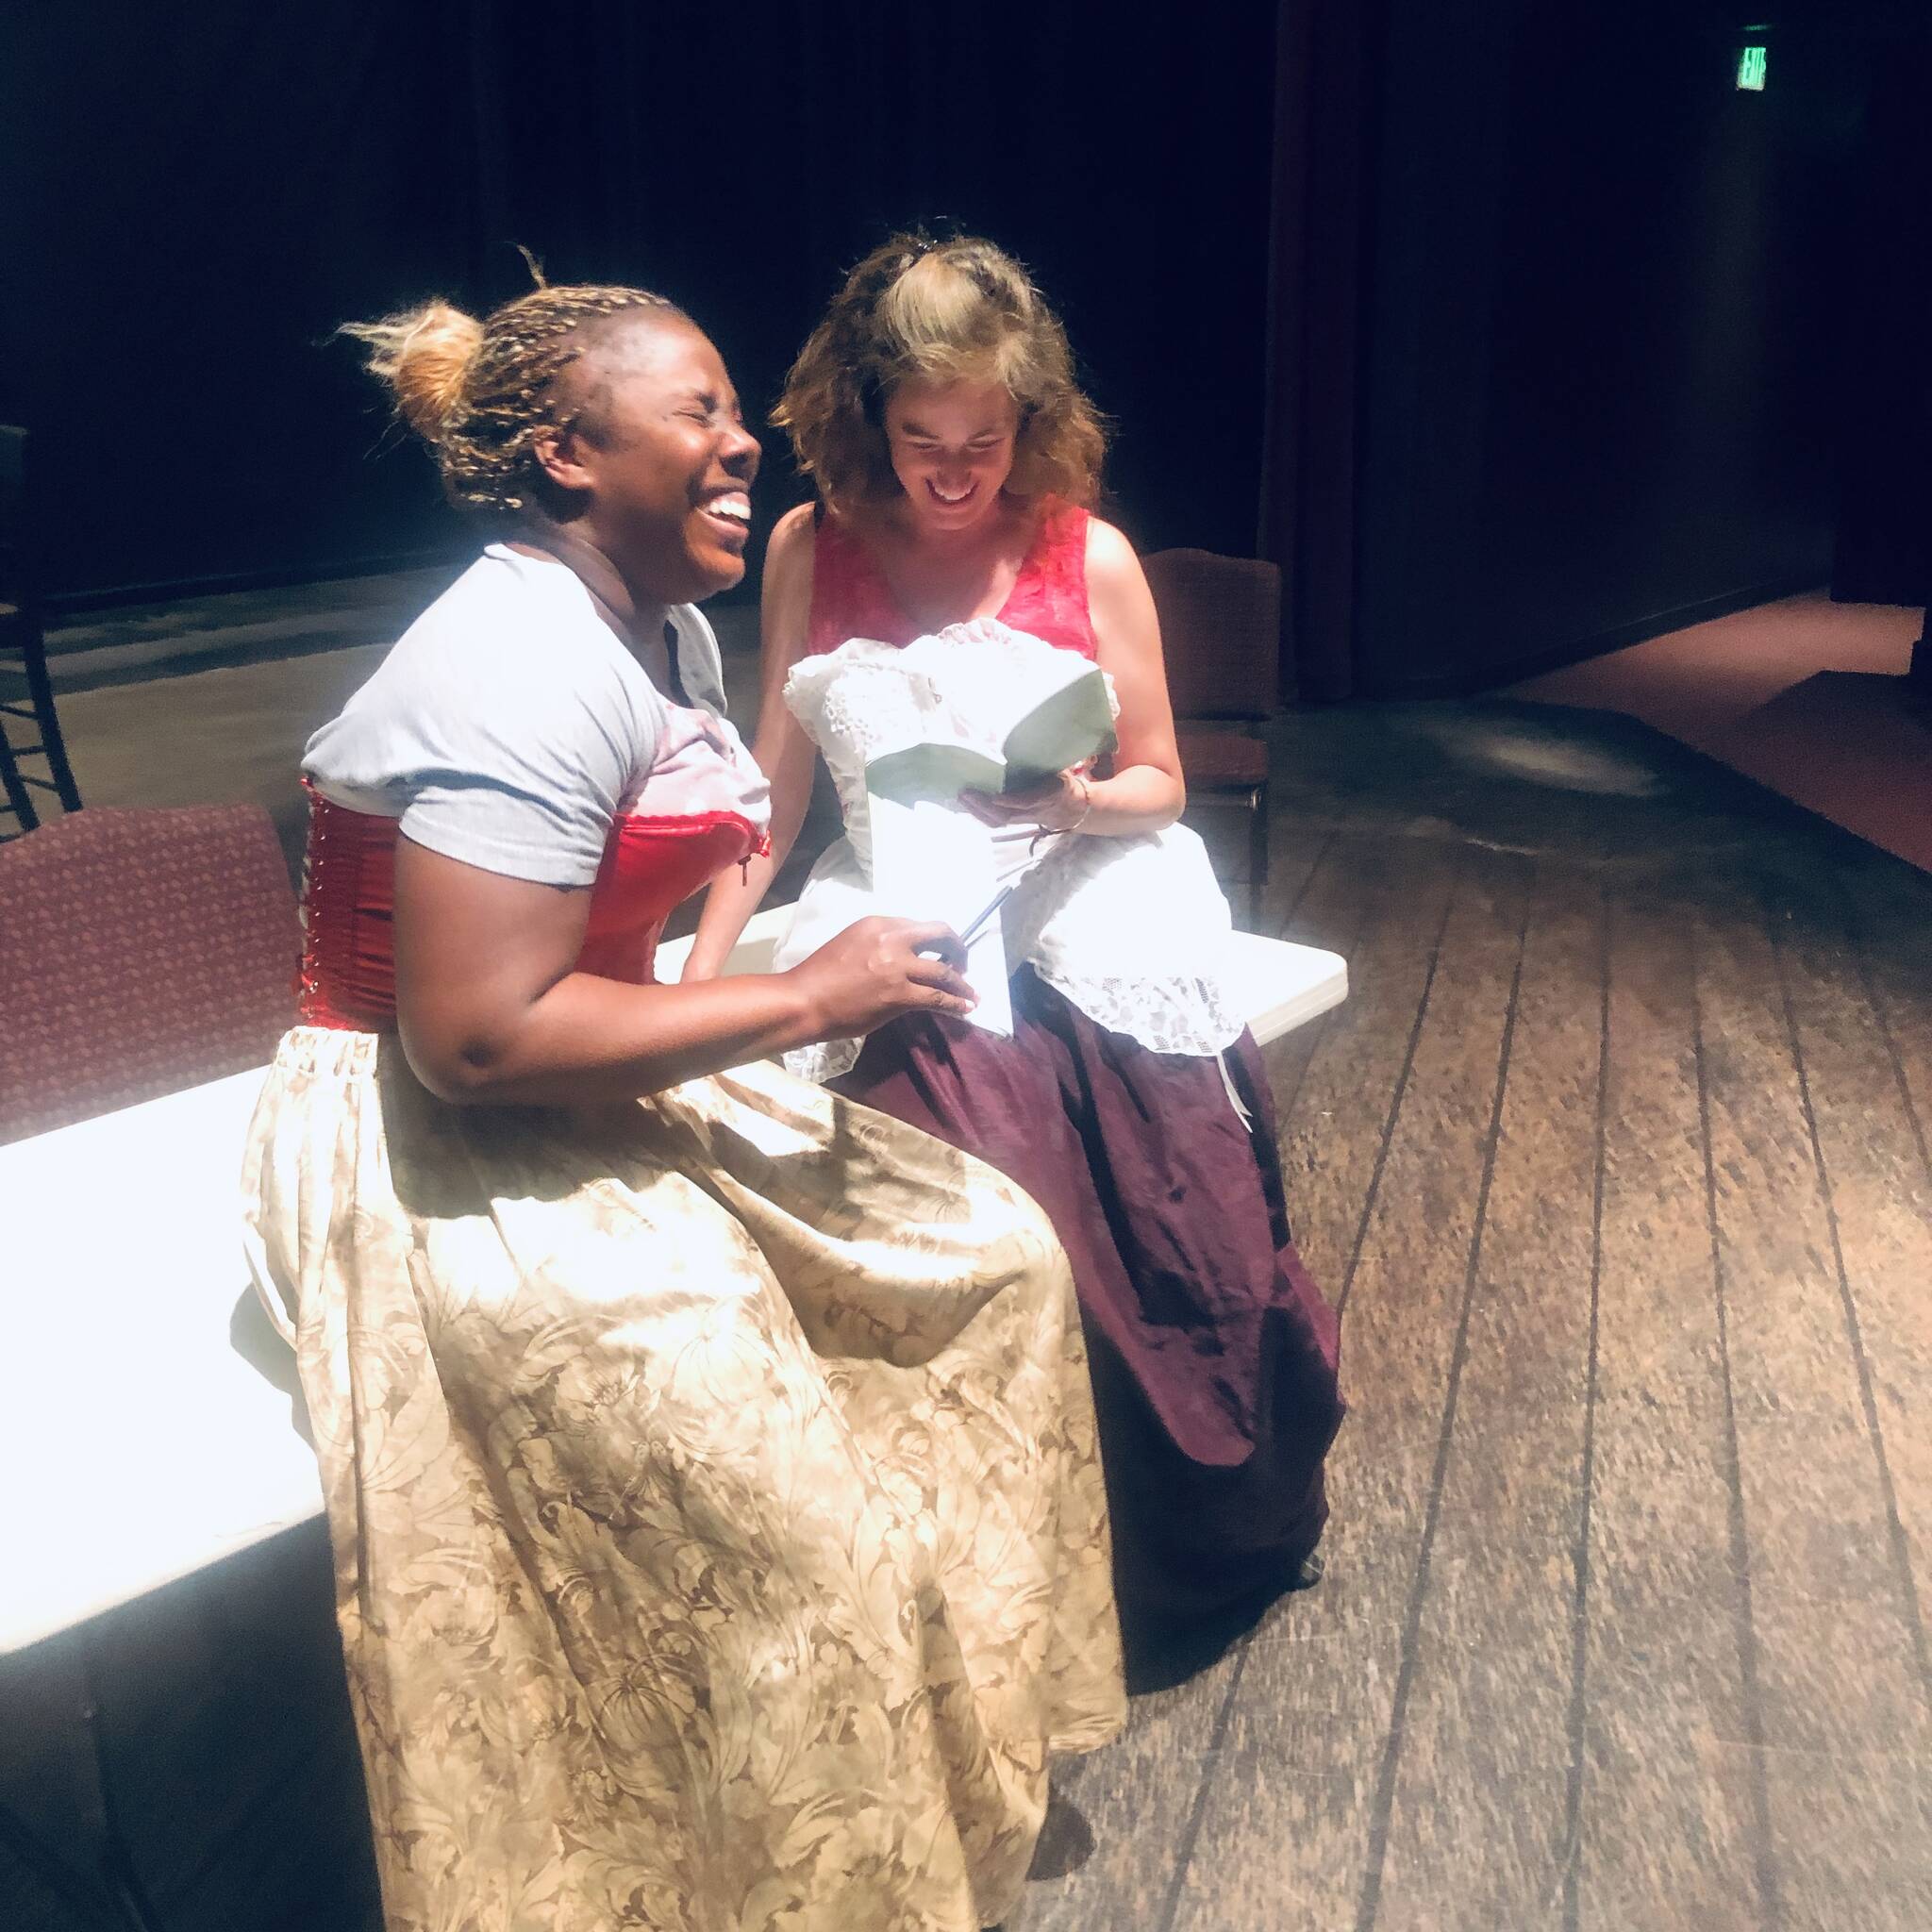 Photos provided
Teresa Hess, right, plays Marie Antoinette and Abie Ekenezar plays composite character Marianne Angelle, who is based on the free Black women revolutionaries of the island nation of Saint Domingue.